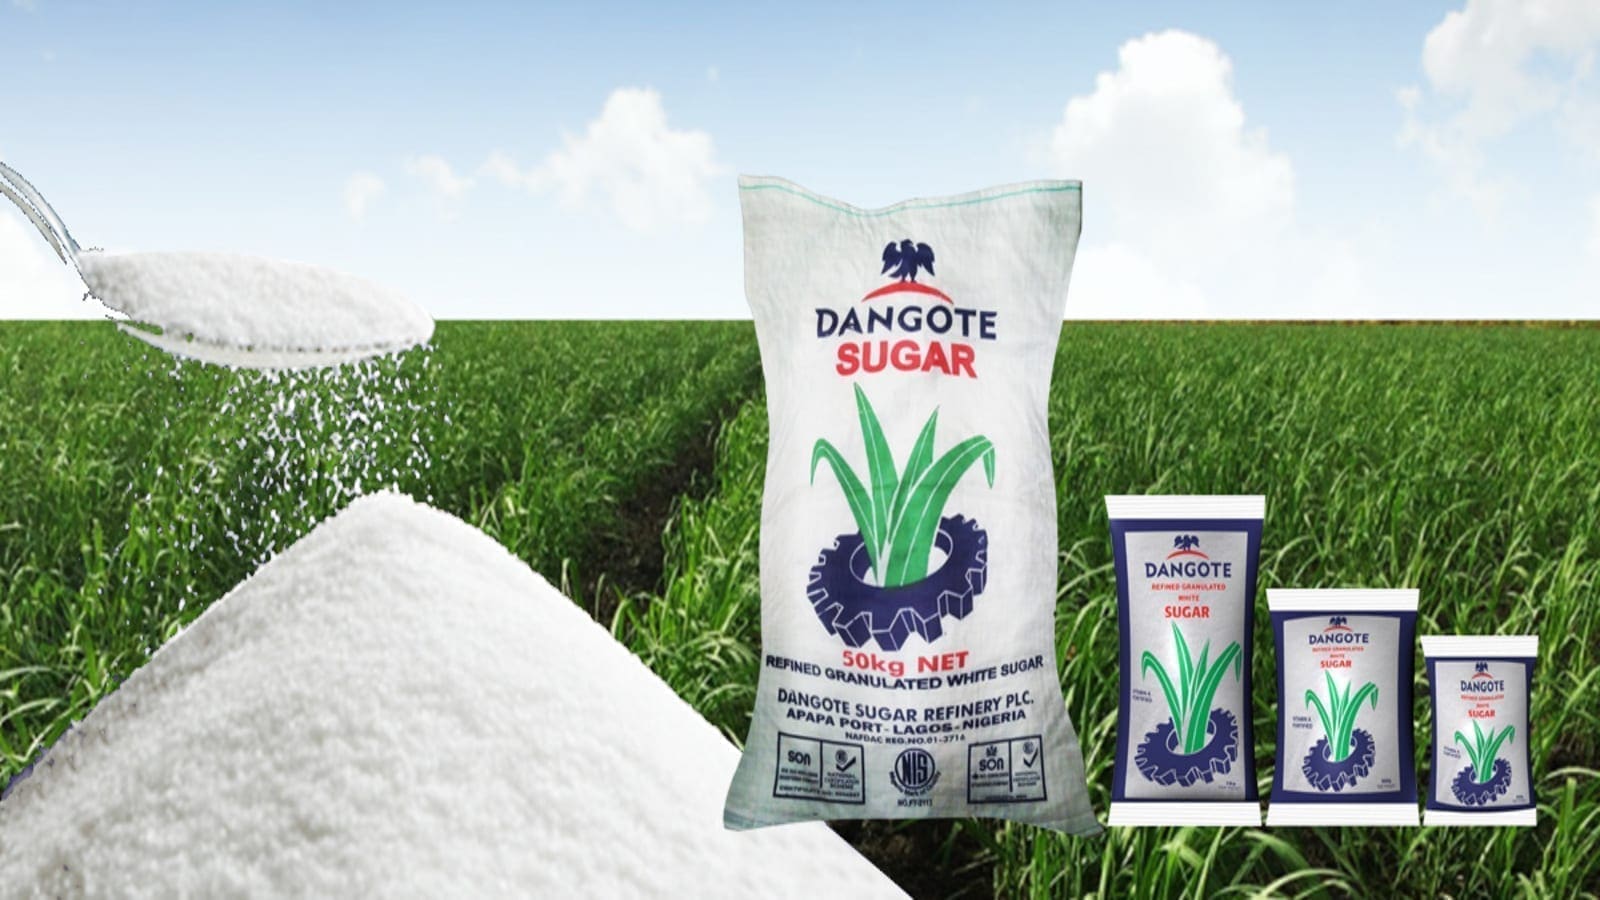 Dangote Sugar records 41.5% growth in revenue catapulted by surge in commodity price